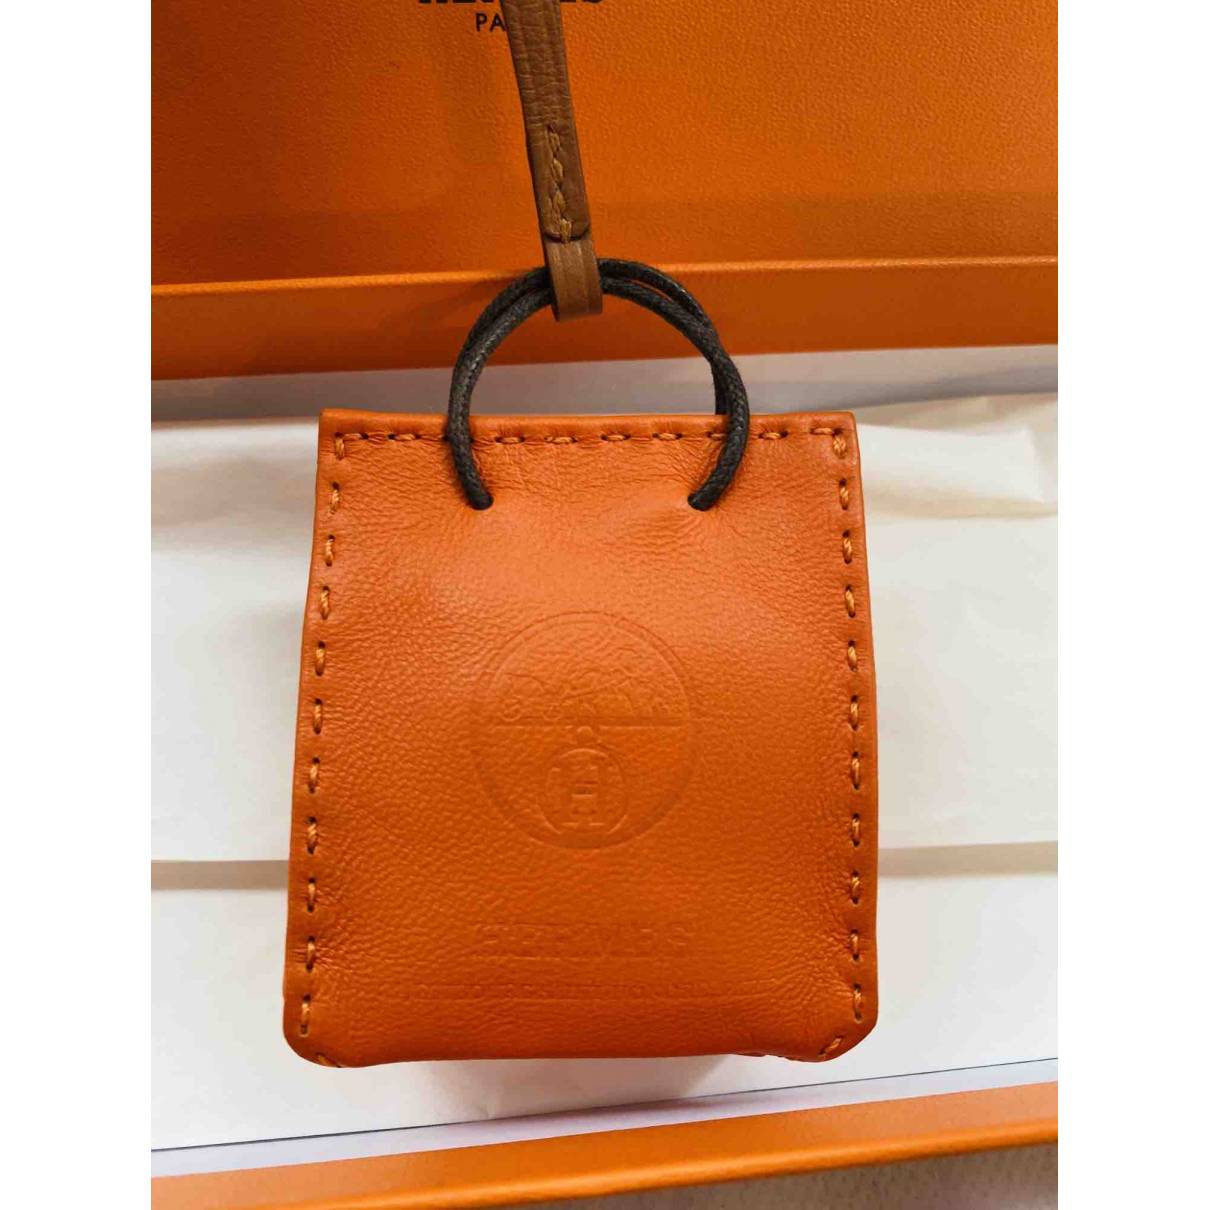 Hermès - Authenticated Shopping Bag Charm Bag Charm - Leather Orange for Women, Very Good Condition